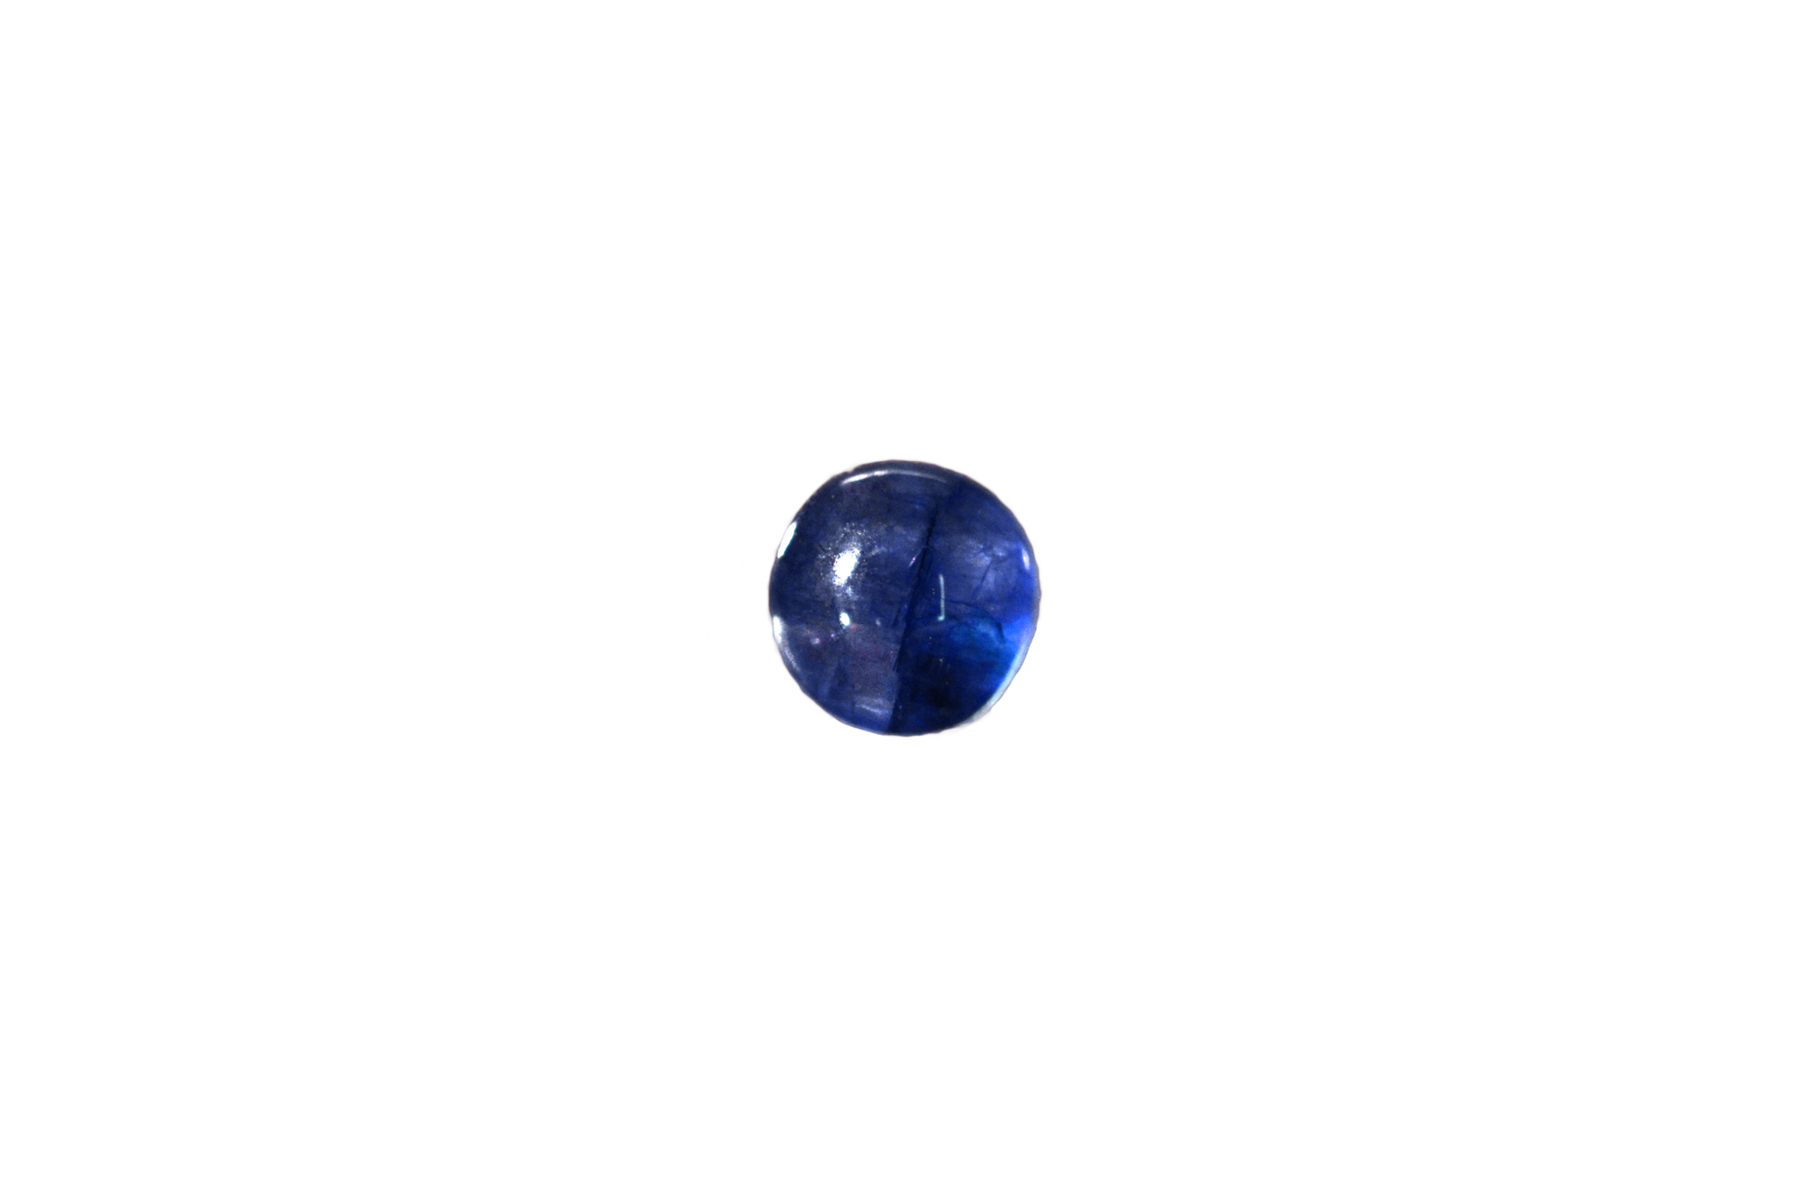 75 cts Natural Untreated Sapphire Round Shape 26 mm Golden Brown Chocolate SAPPHIRE Gemstone Cabochon